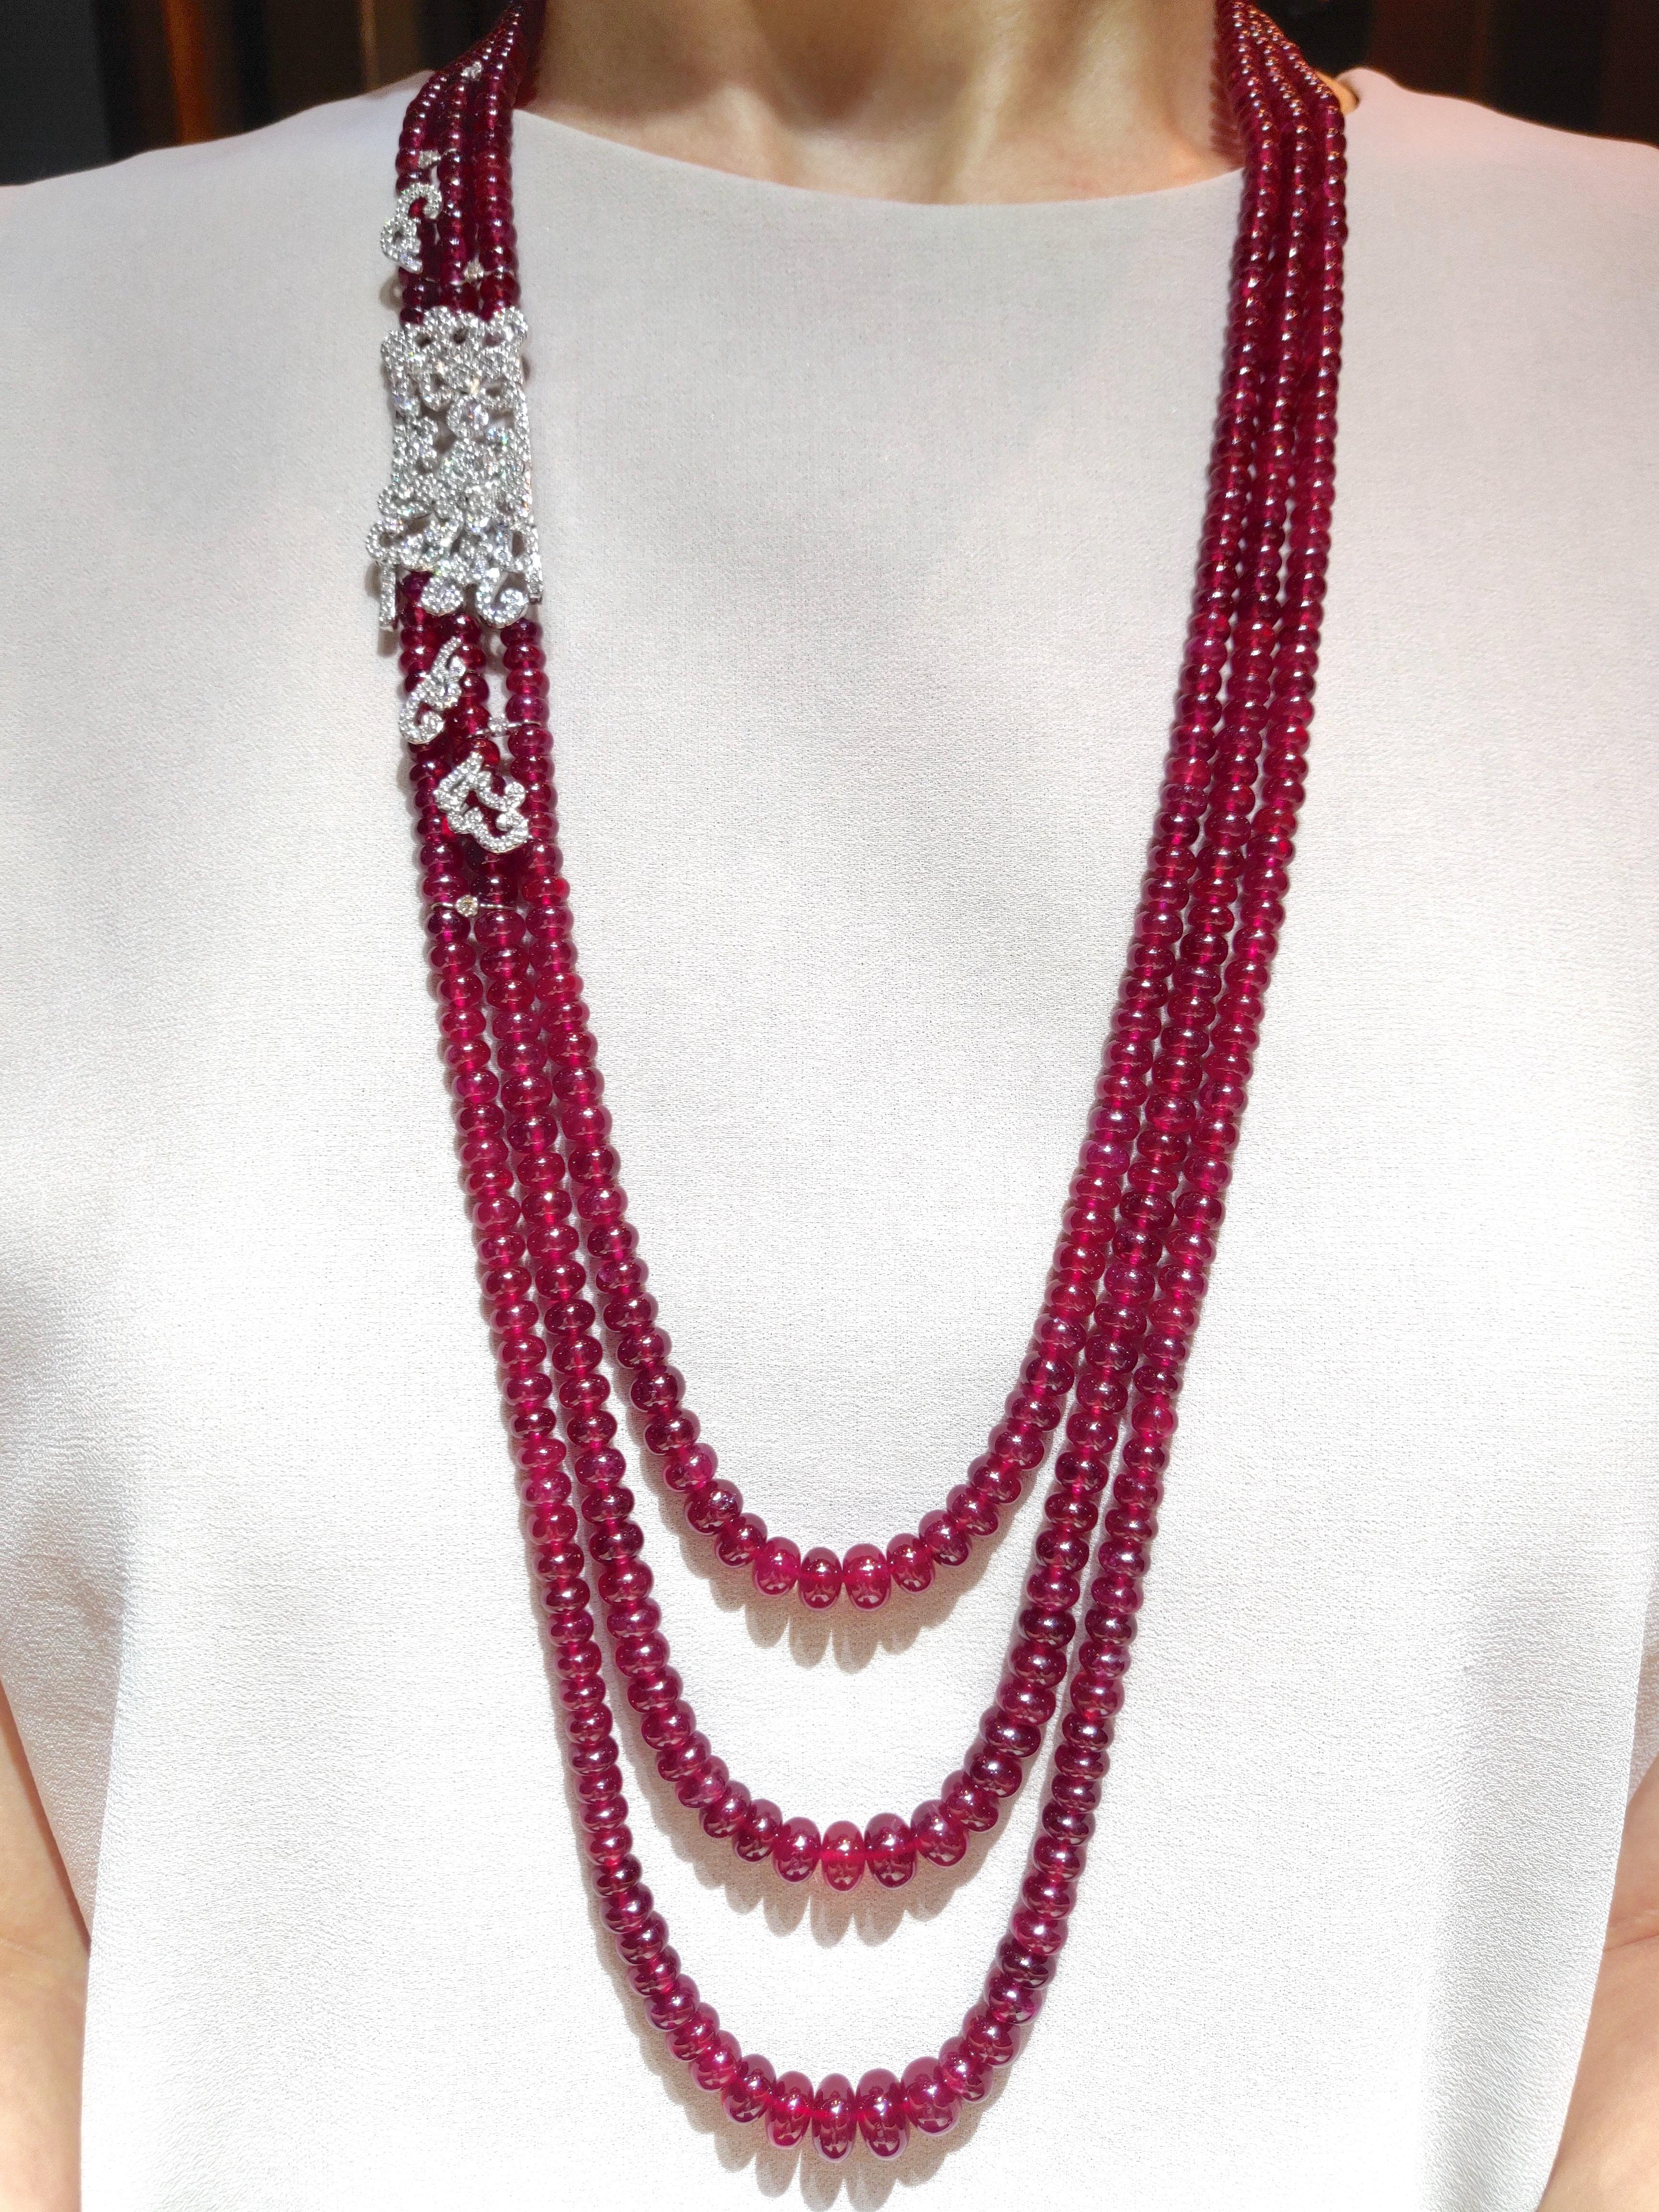 Triple-Strand Long Graduated Red Ruby Bead Necklace with Diamond Floral Embellishments in 18K White Gold

Gold: 18K White Gold, 28.09 g
Ruby: 1,220 ct
Diamond: 4.60 ct

Length: 40 inches